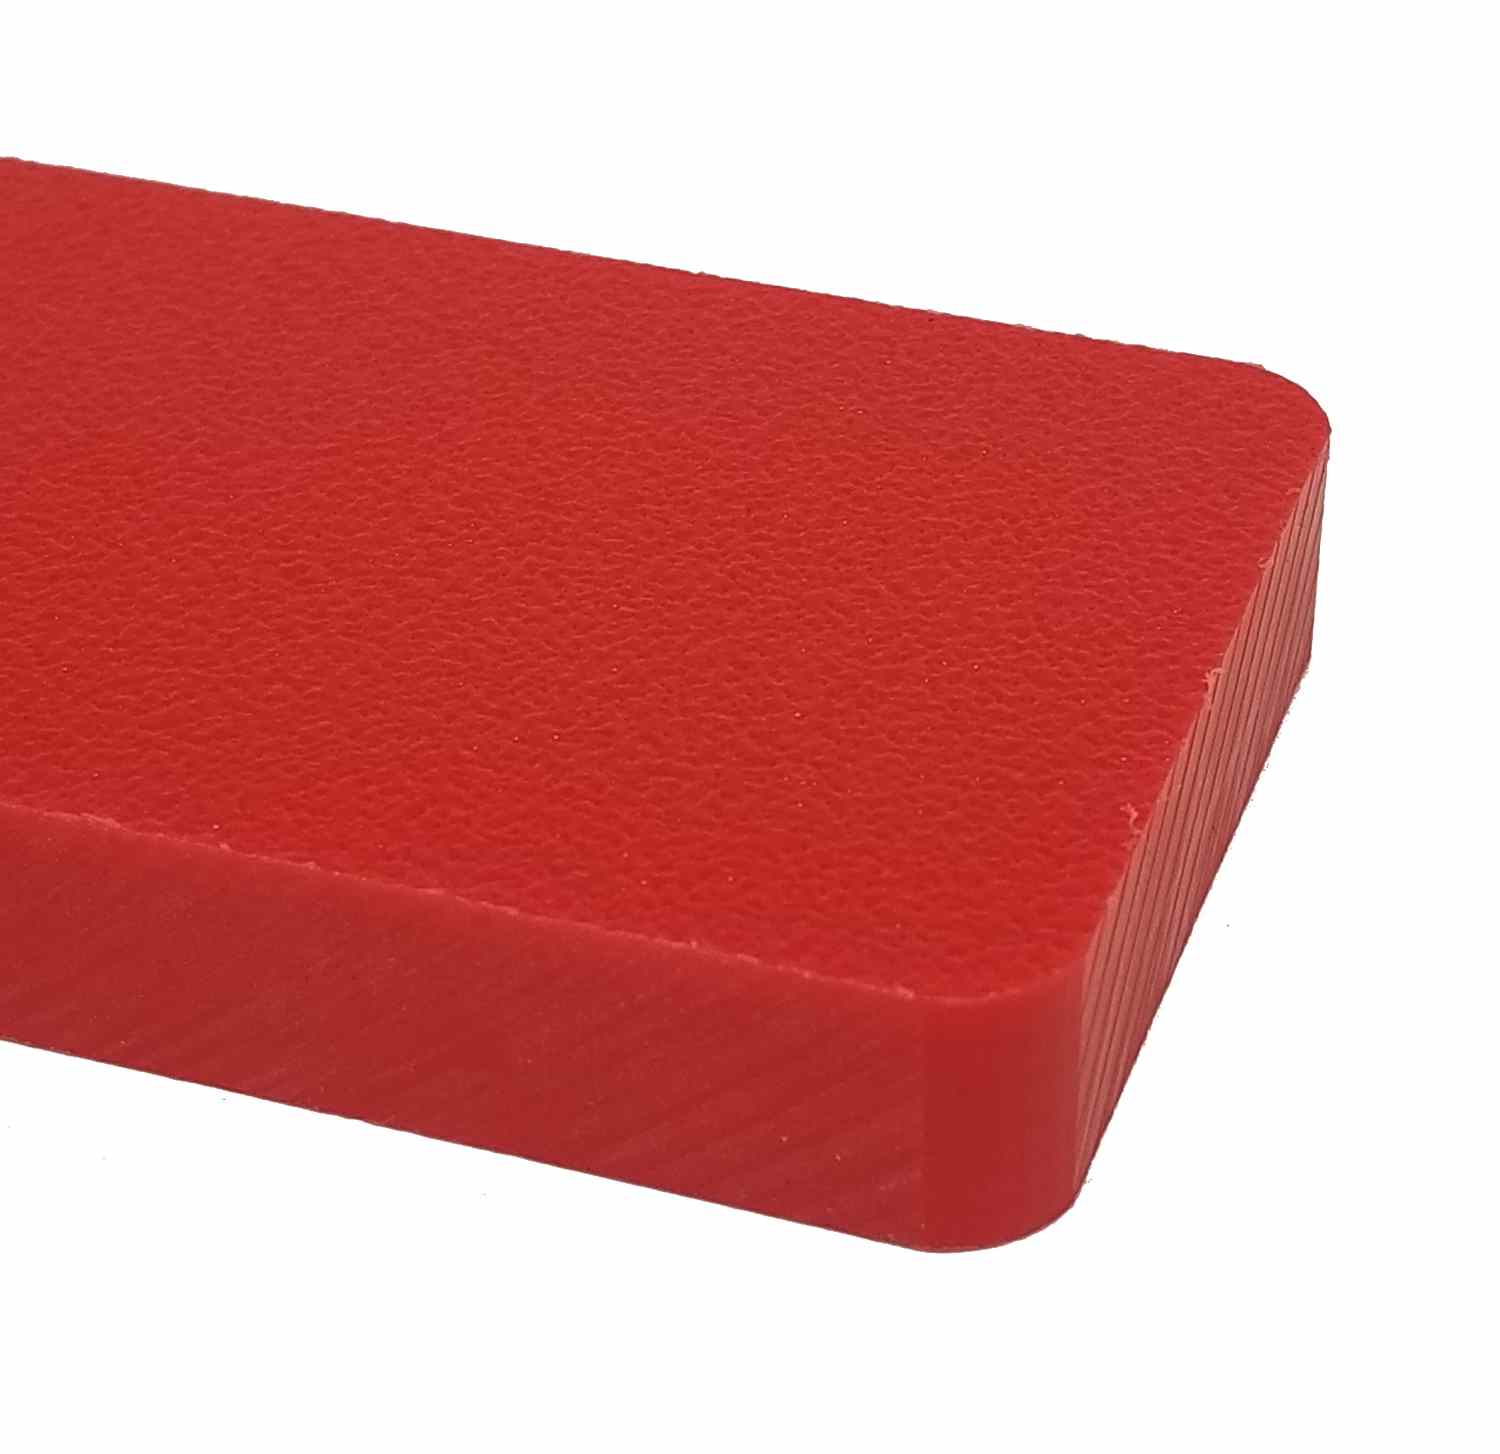 HDPE Colored Cutting Board | Red